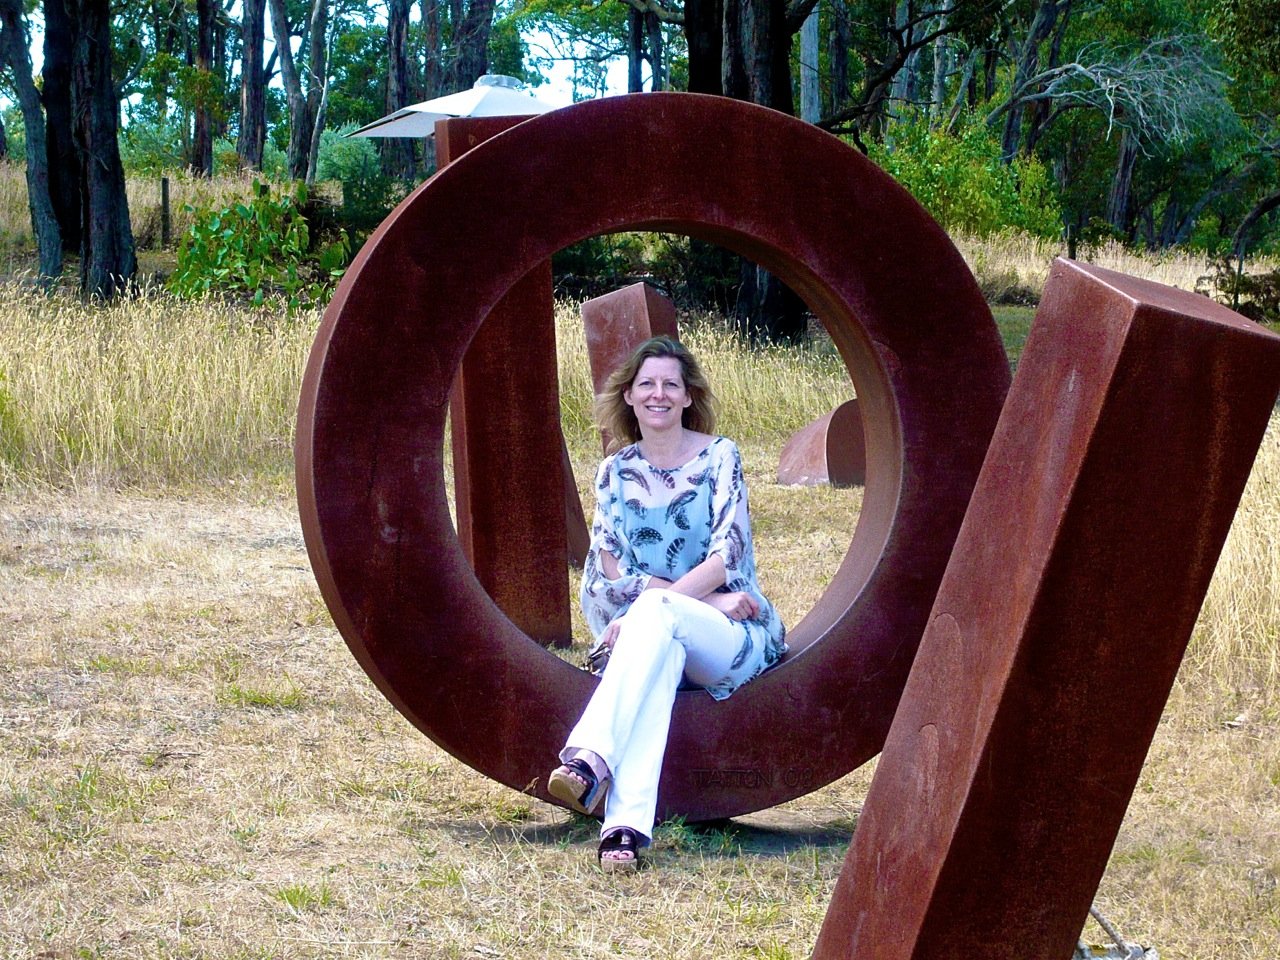 This is me at a fantastic vineyard in Australia amongst the lovely sculptures